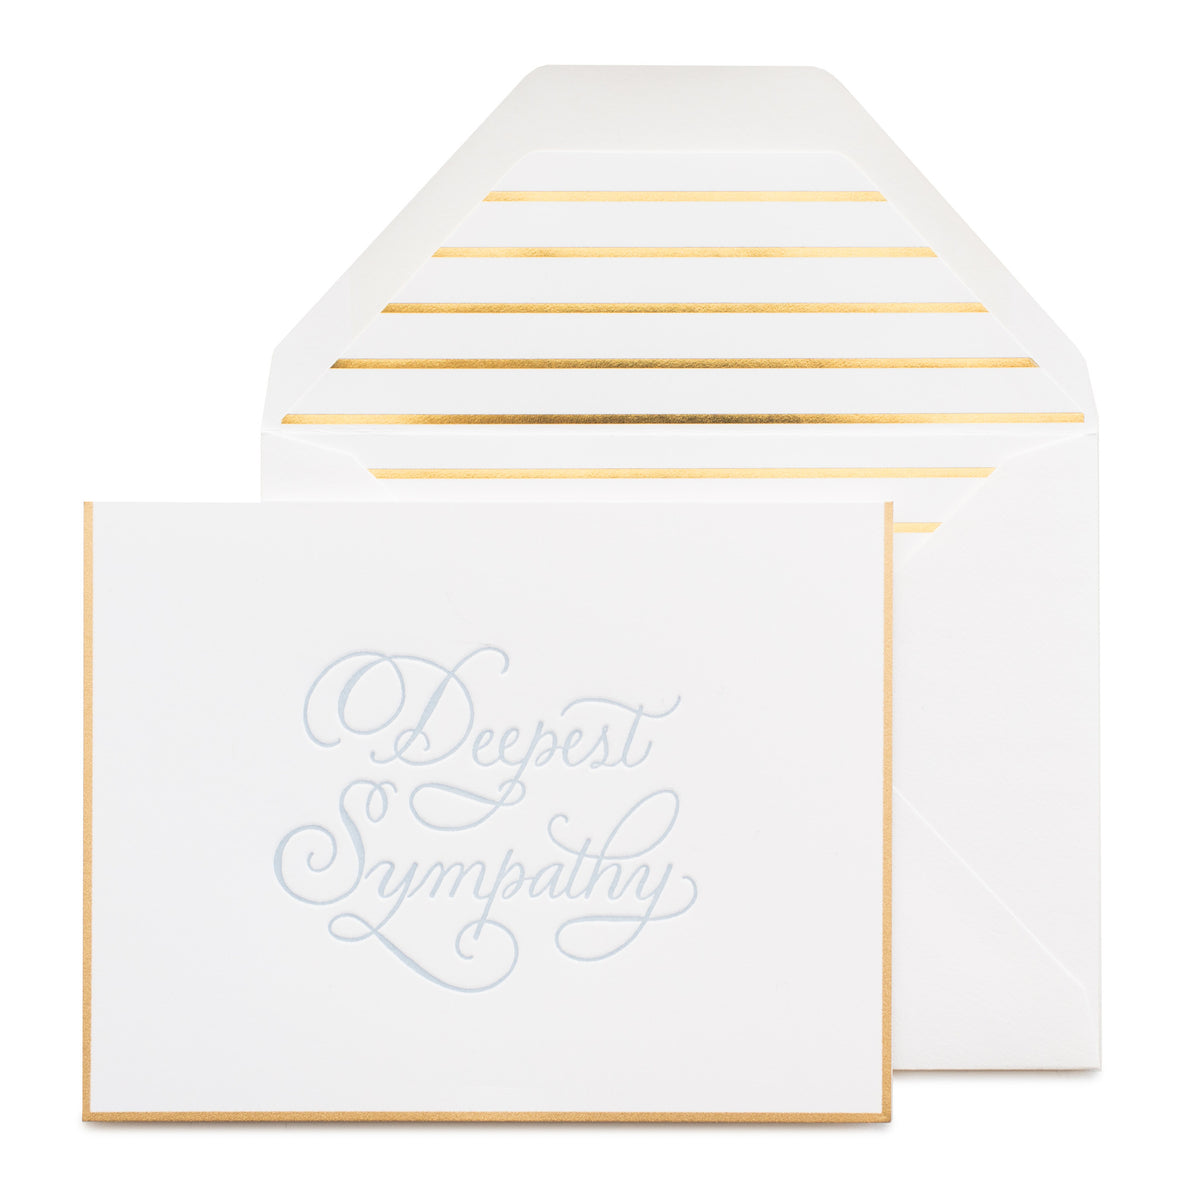 Gold bordered card printed with deepest sympathy in blue ink with a gold striped envelope